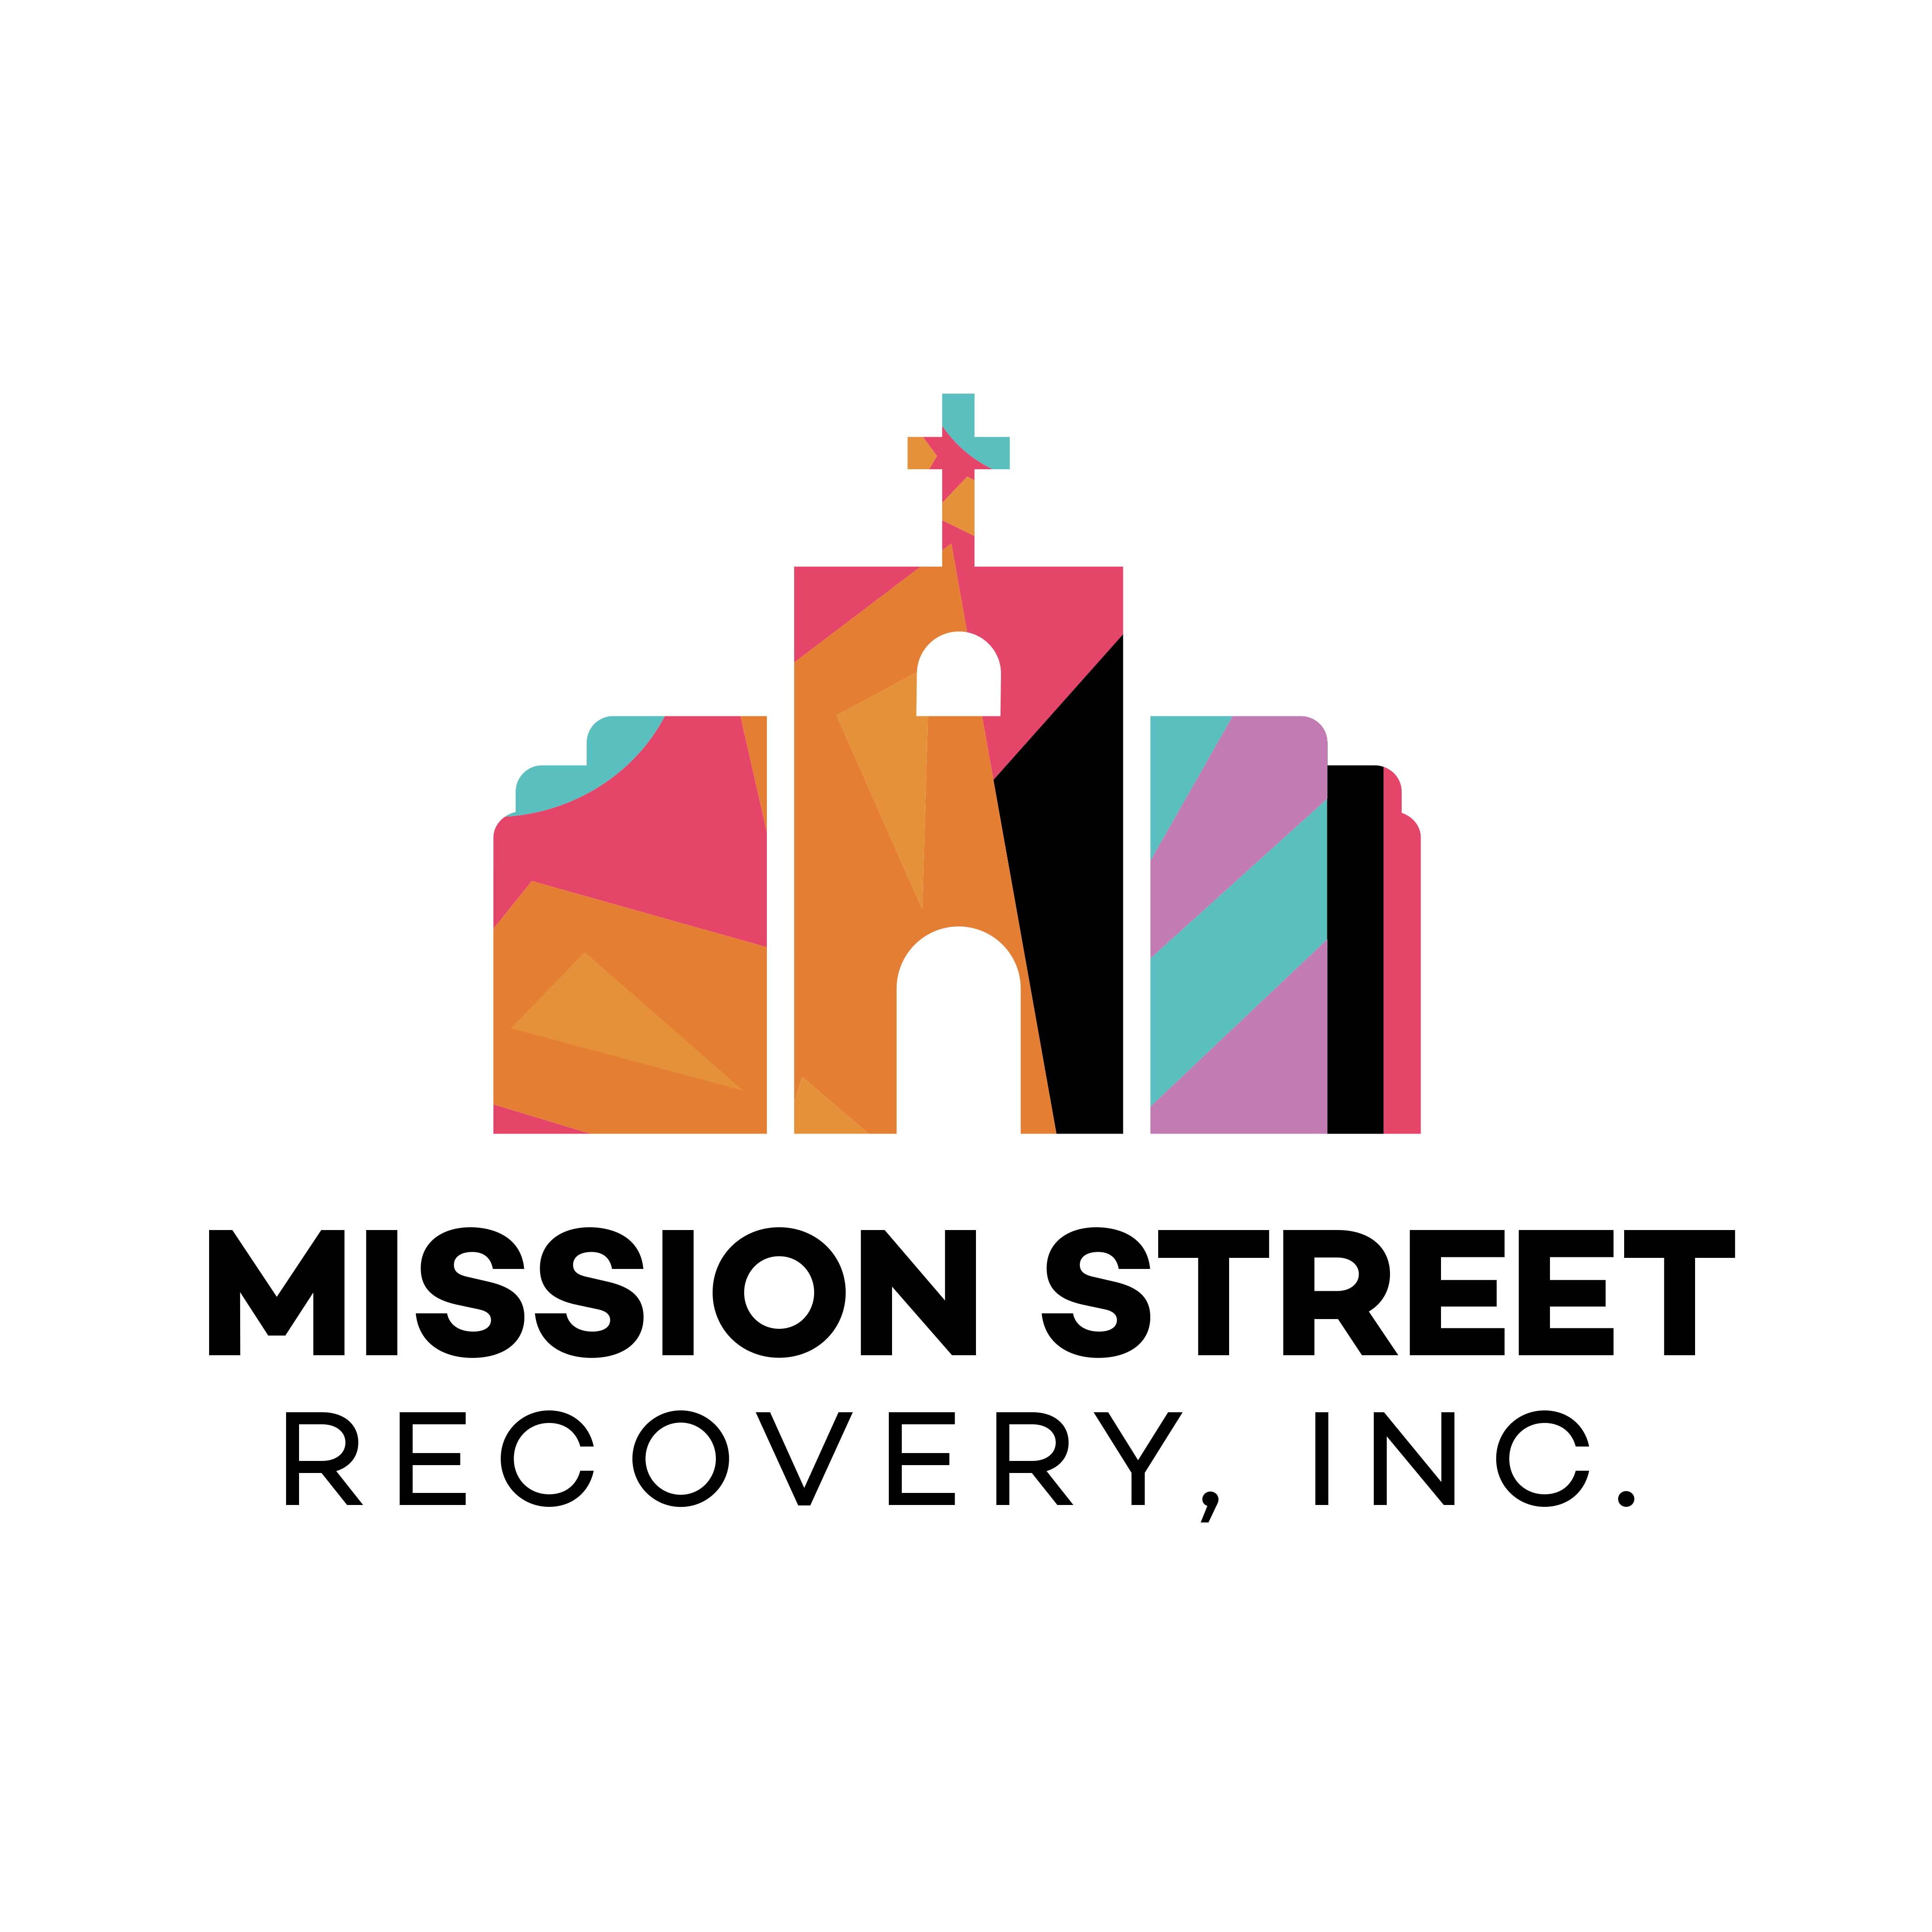 Recovery Logo - Mission Street Recovery, Inc. Logo + Branding